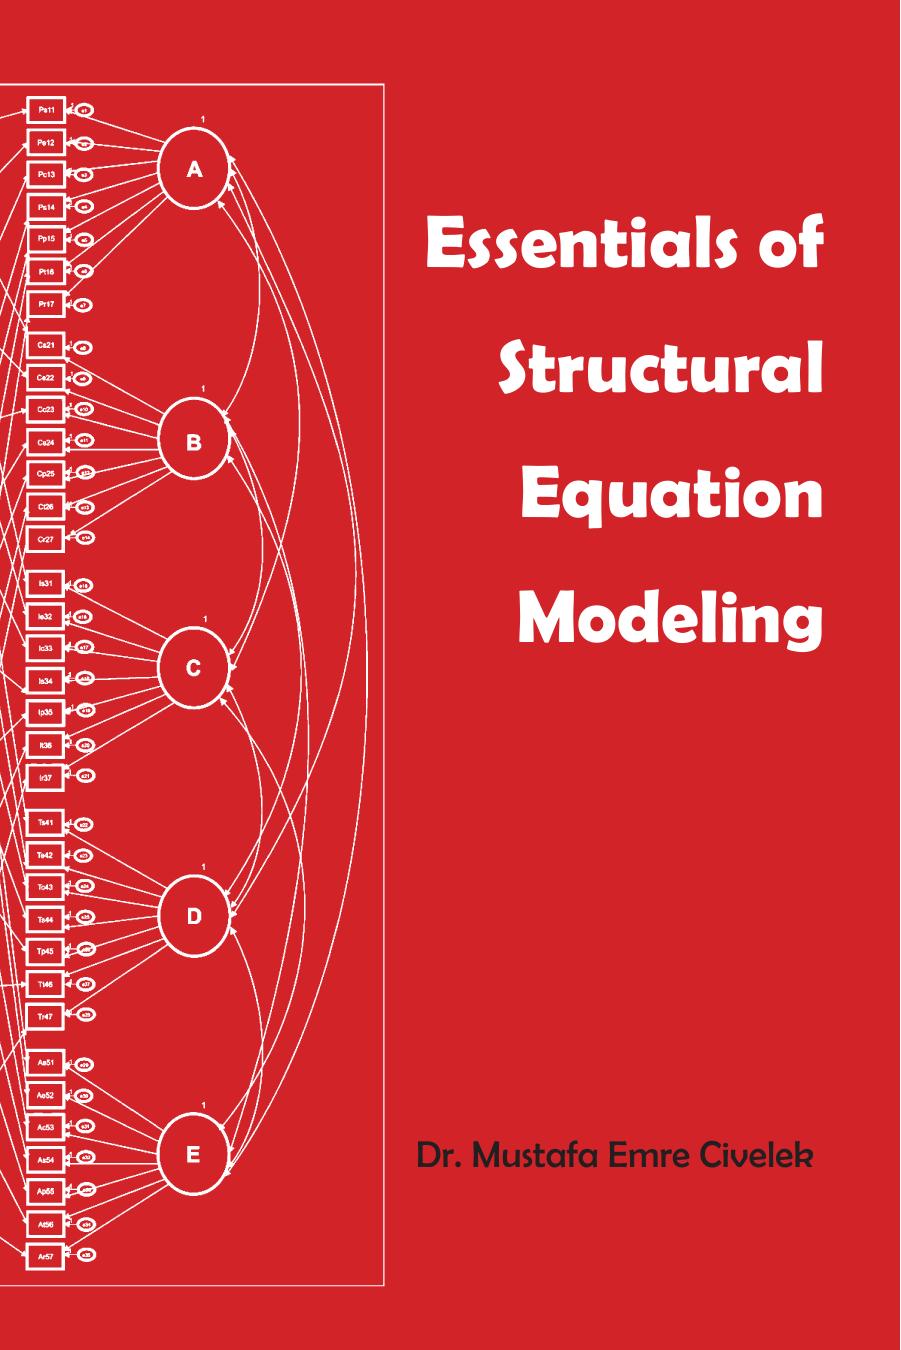 Essentials of Structural Equation Modeling by Mustafa Emre Civilek